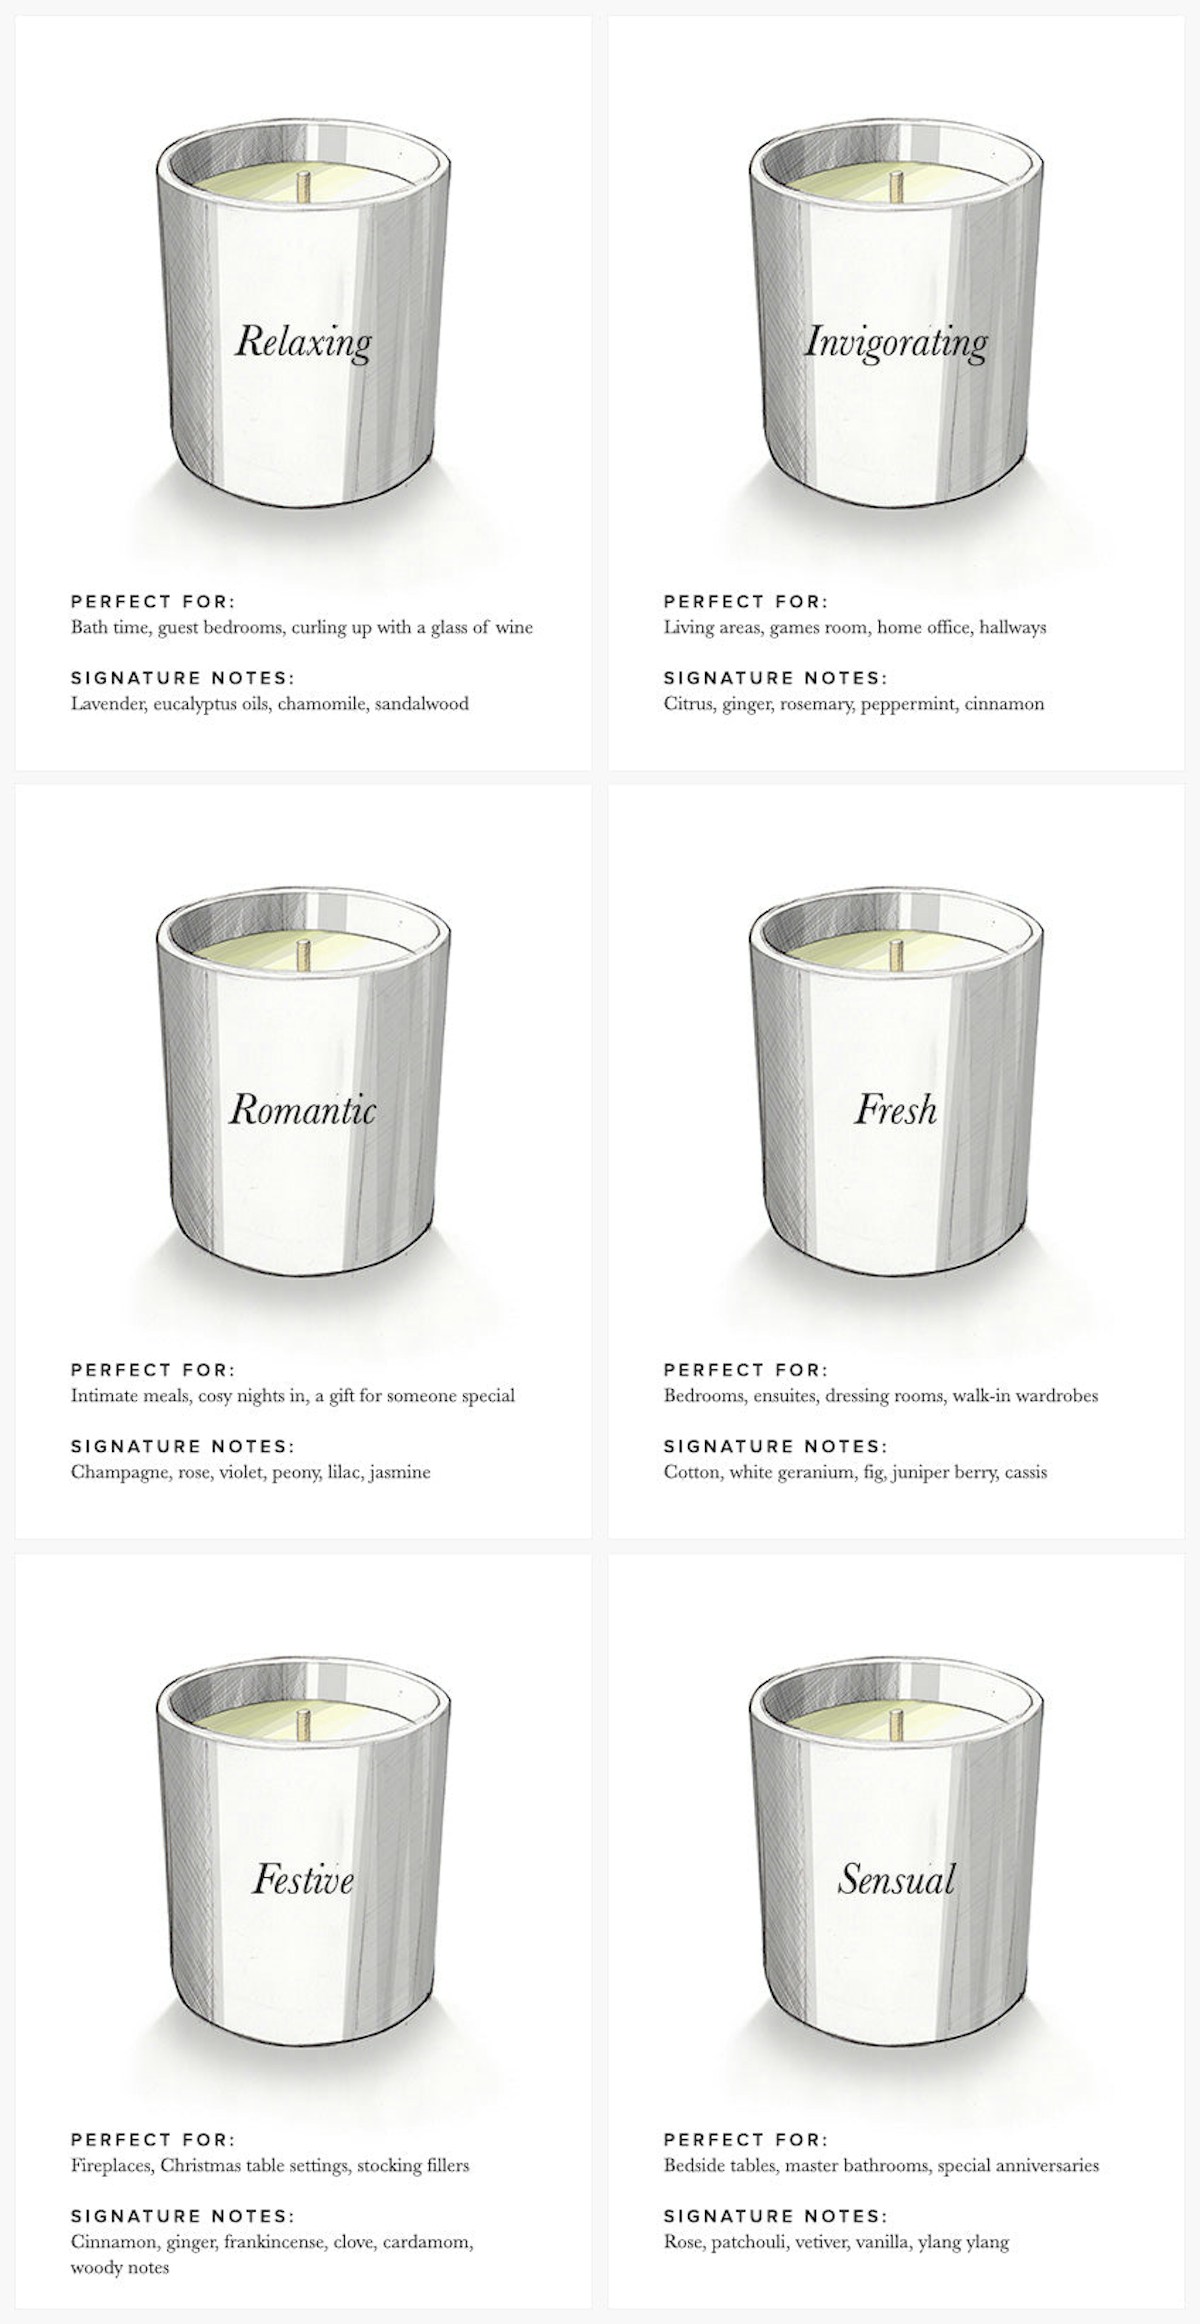 Candle Buying Guide: Choosing Scents, Styles & Wax Types - LuxDeco Style Guide